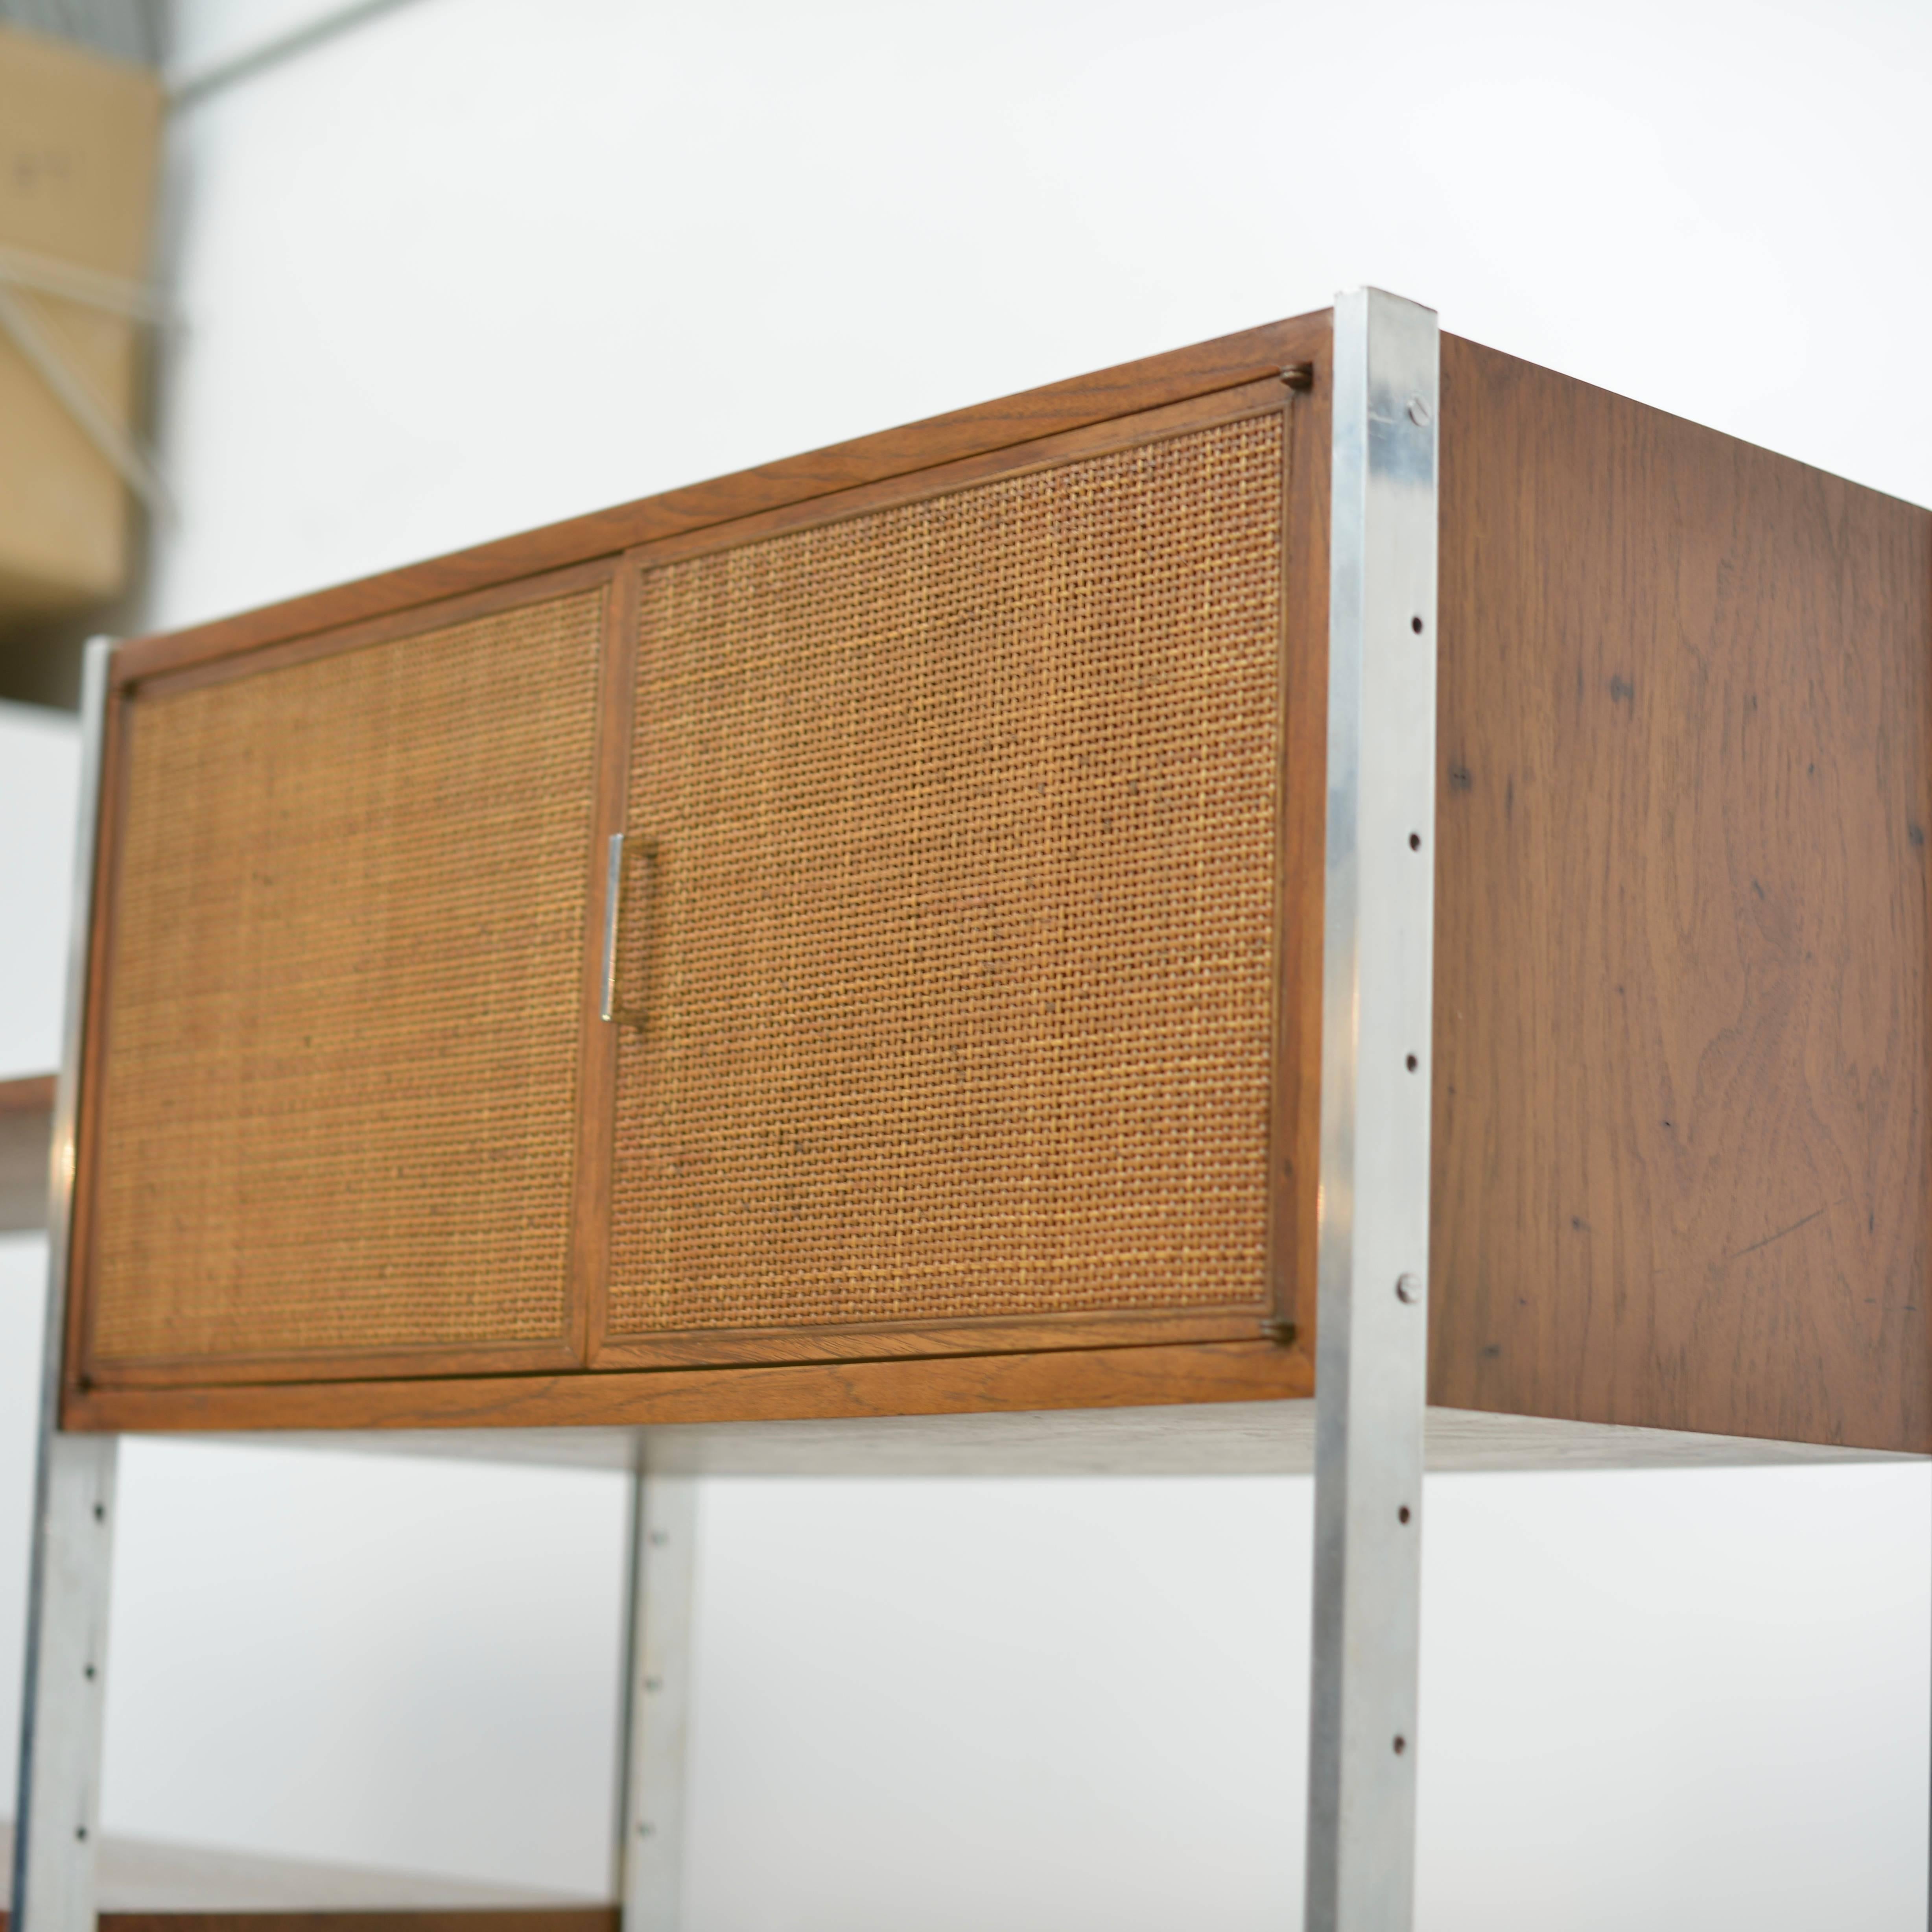 Milo Baughman Attributed Walnut and Aluminium Wall Unit by Founders 1